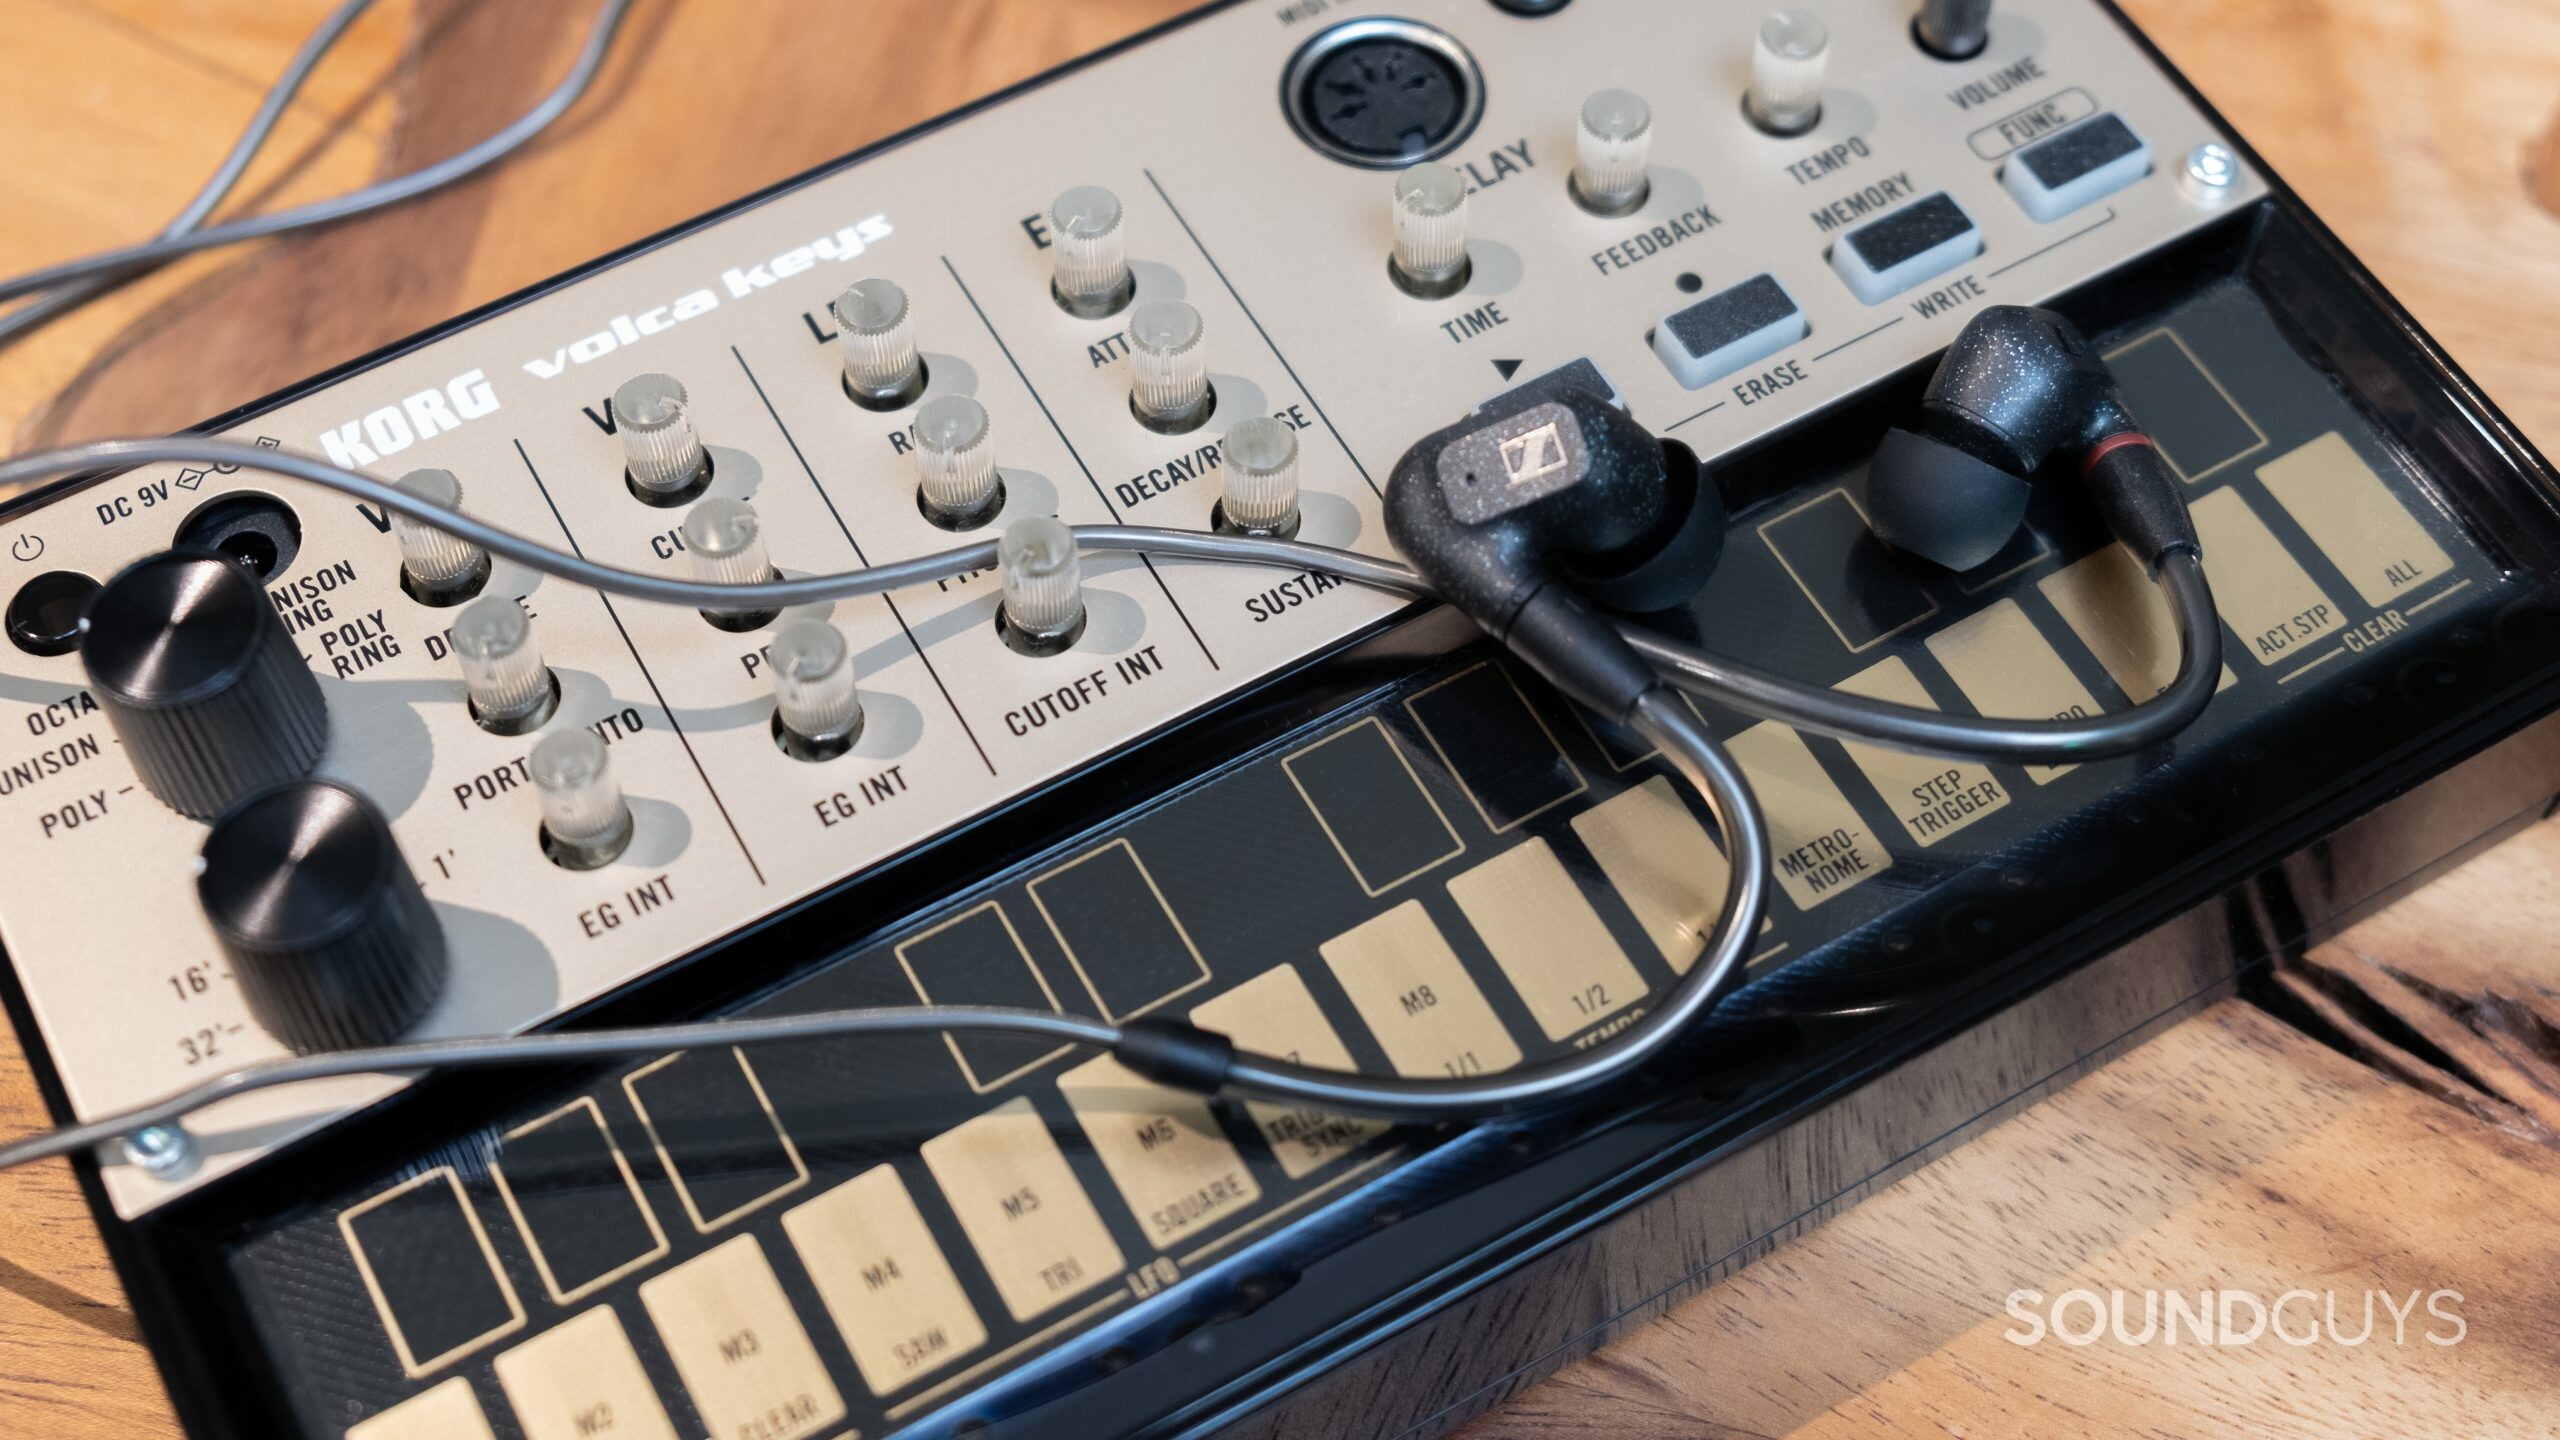 Here is the Sennheiser IE 300 placed on a Volca Keys synth.